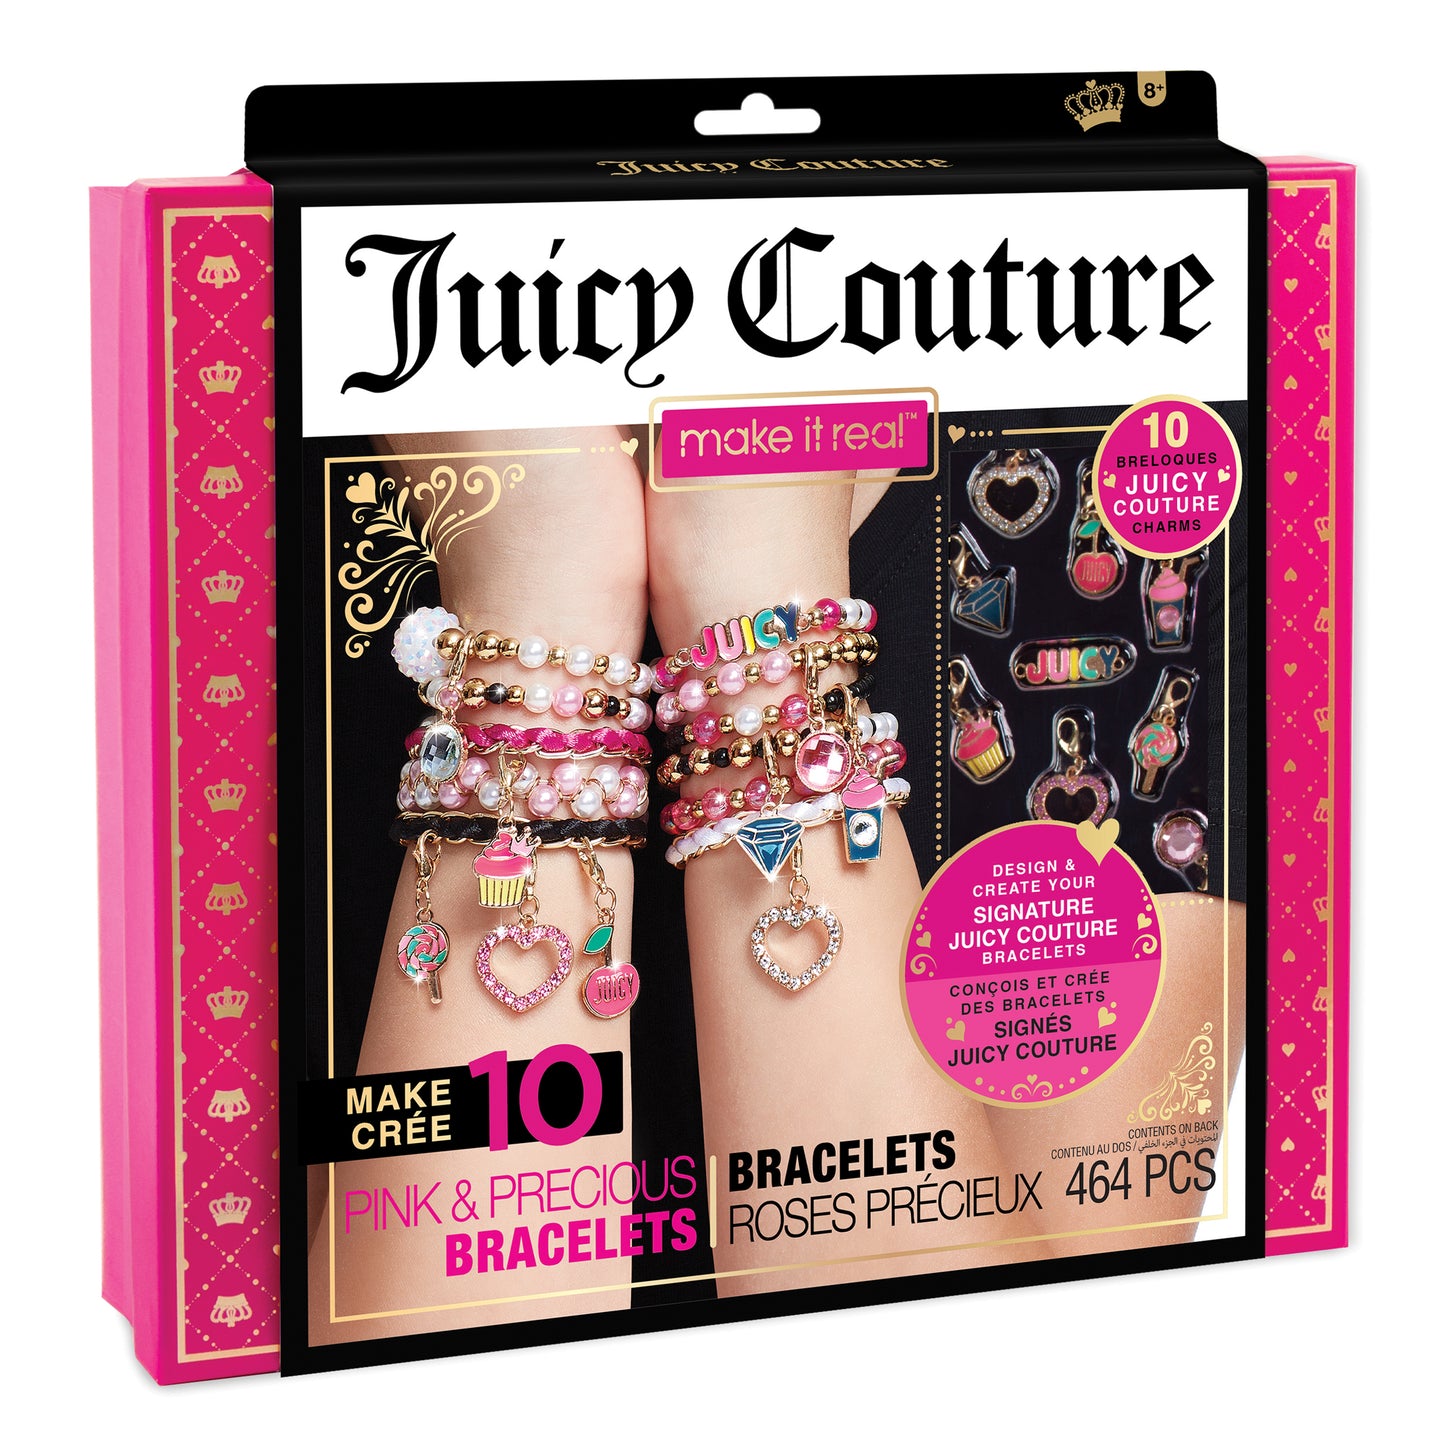 Make It Real Juicy Couture Glamour Stacks Bracelet Kit - Each